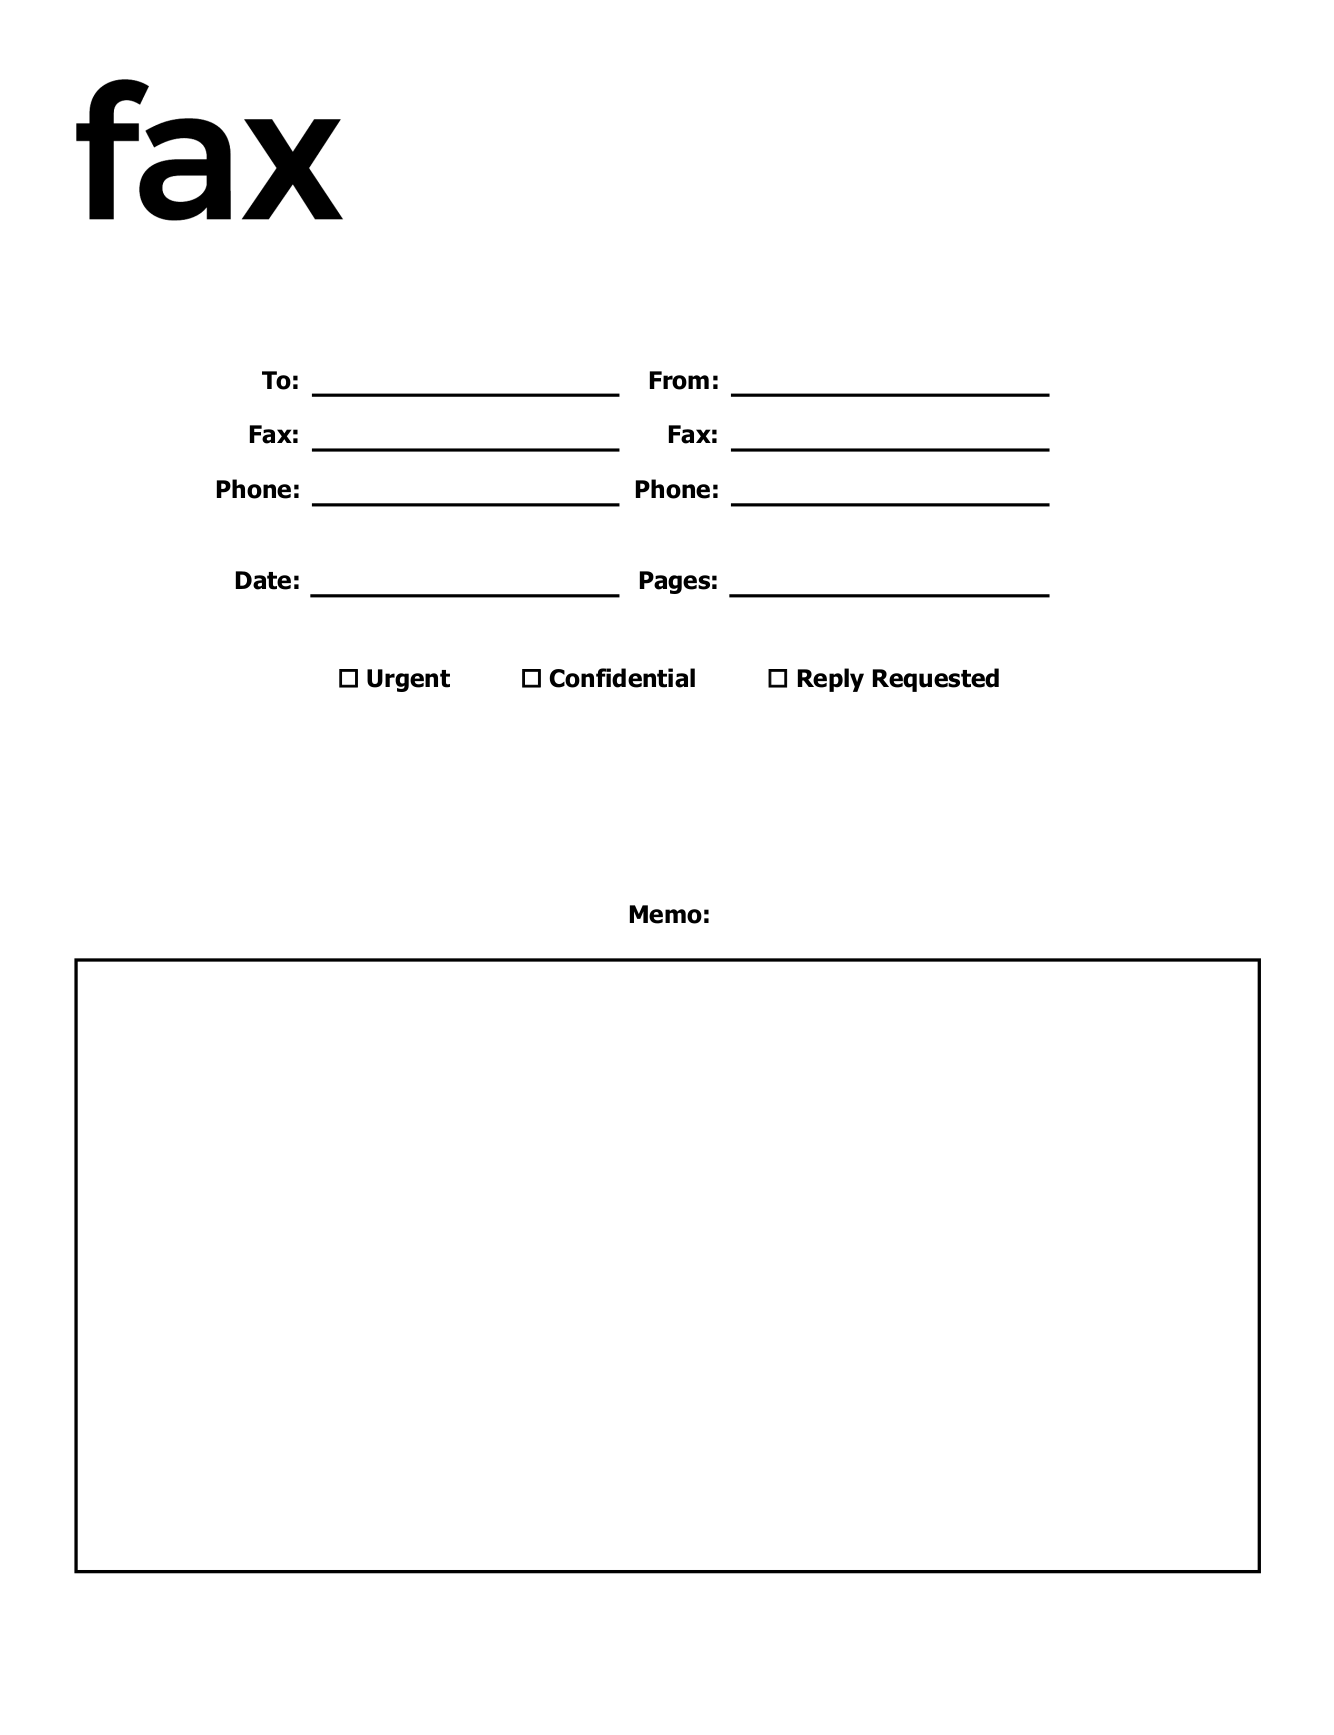 example-of-free-fax-cover-sheet-lovelylawpc